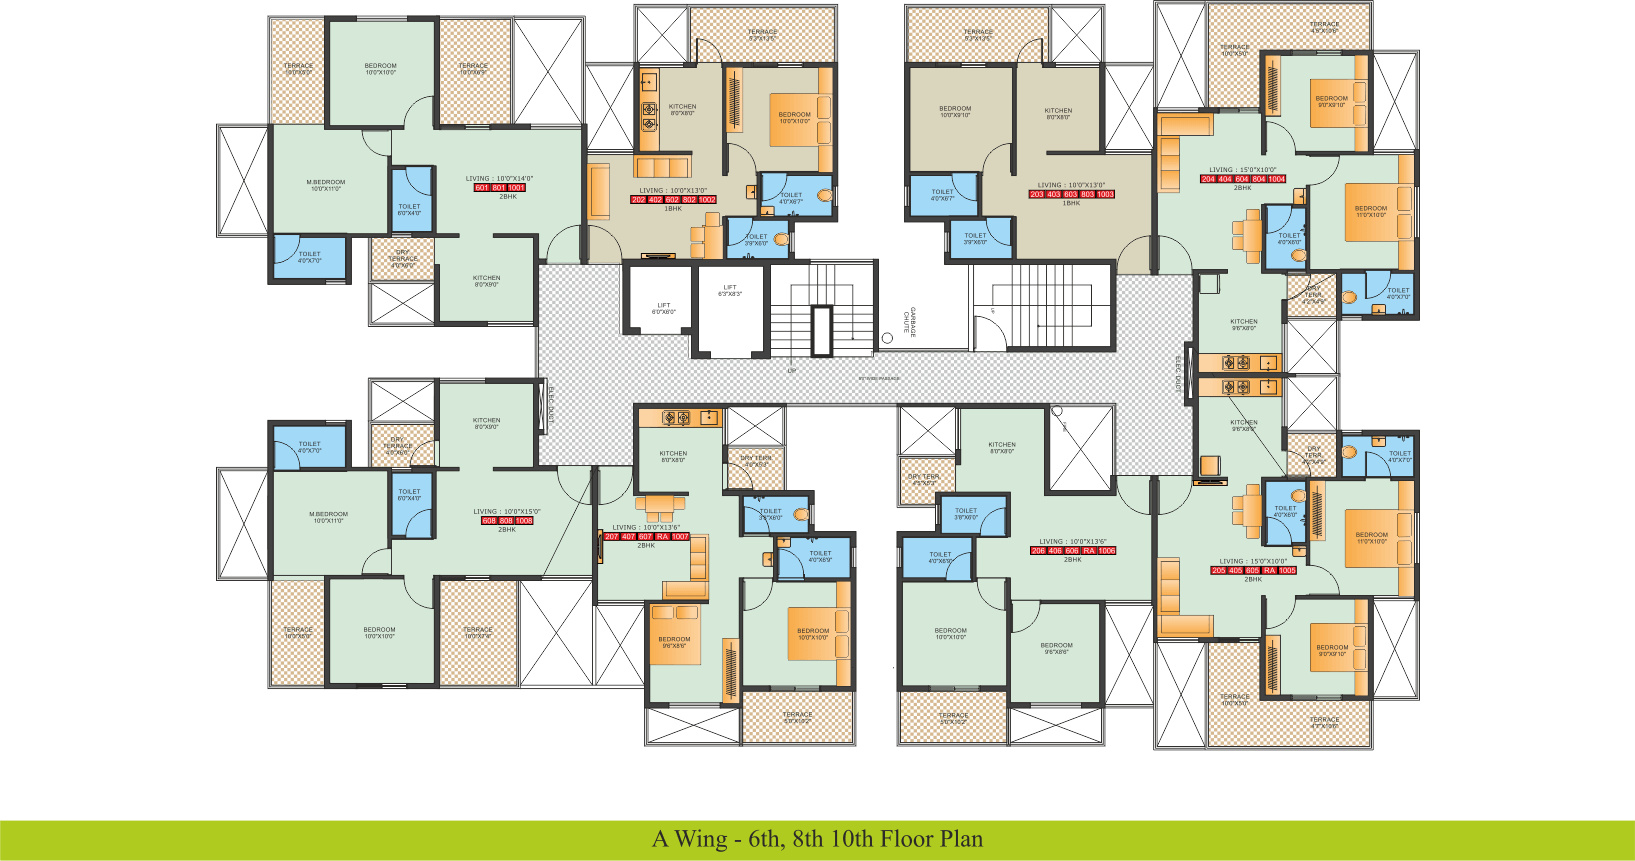 A Wing 6th, 8th, 10th Floor Plan